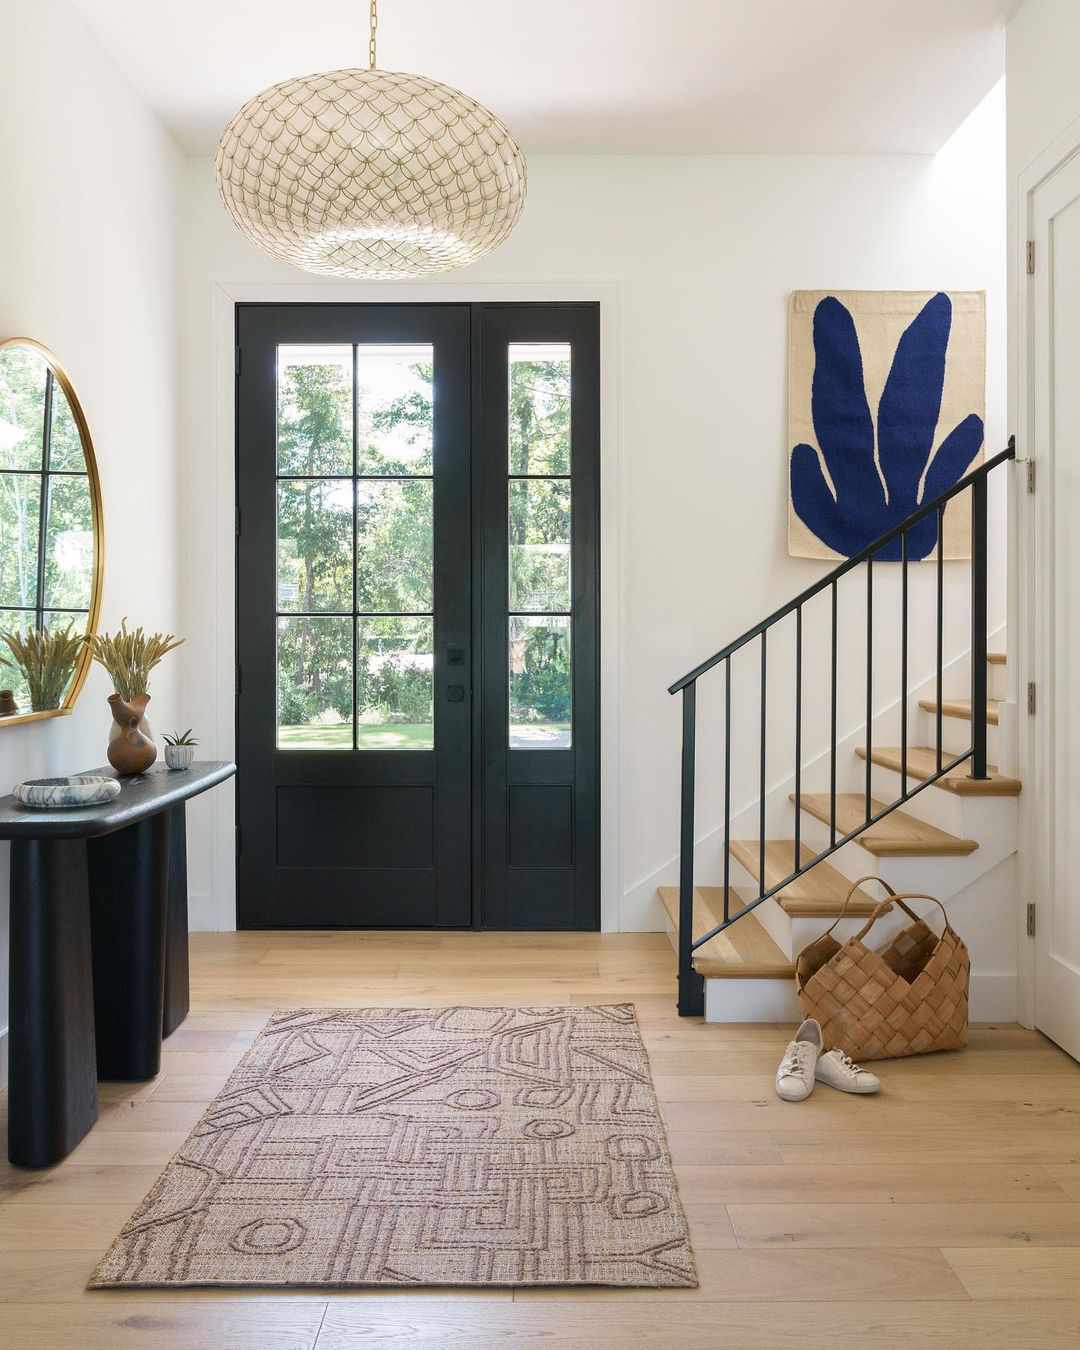 Stylish entryway with bold light fixture.